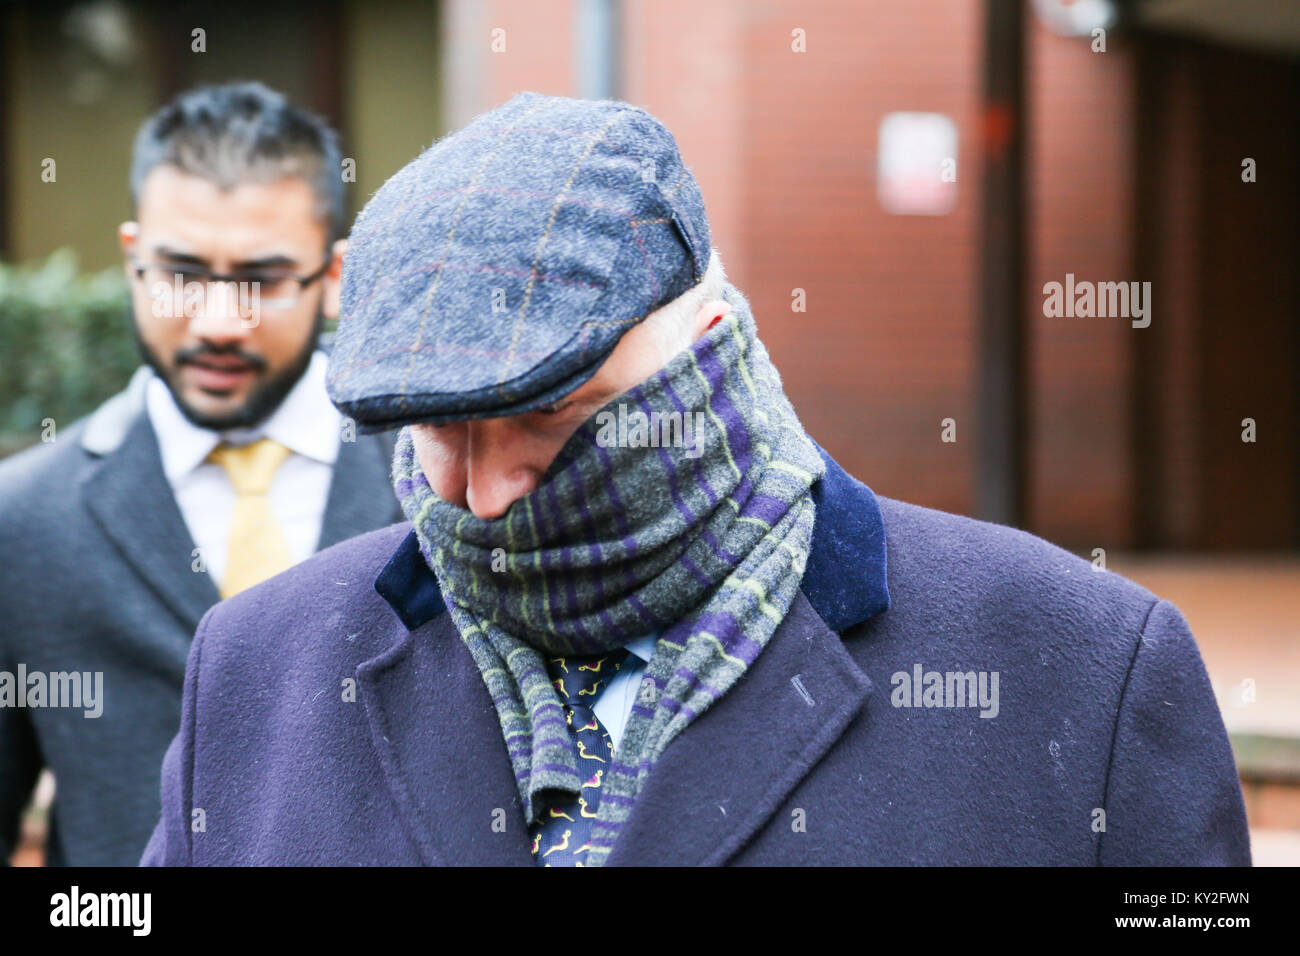 Birmingham, UK. 12th Jan, 2018. Birmingham surgeon leaves Birmingham Crown Court after sentencing. He pleaded guilty to two counts of assault by beating after he wrote his initials on the livers of the two patients without their consent, and for no clinical reason, in 2013 while working as a liver transplant surgeon at Queen Elizabeth Hospital. Credit: Peter Lopeman/Alamy Live News Stock Photo